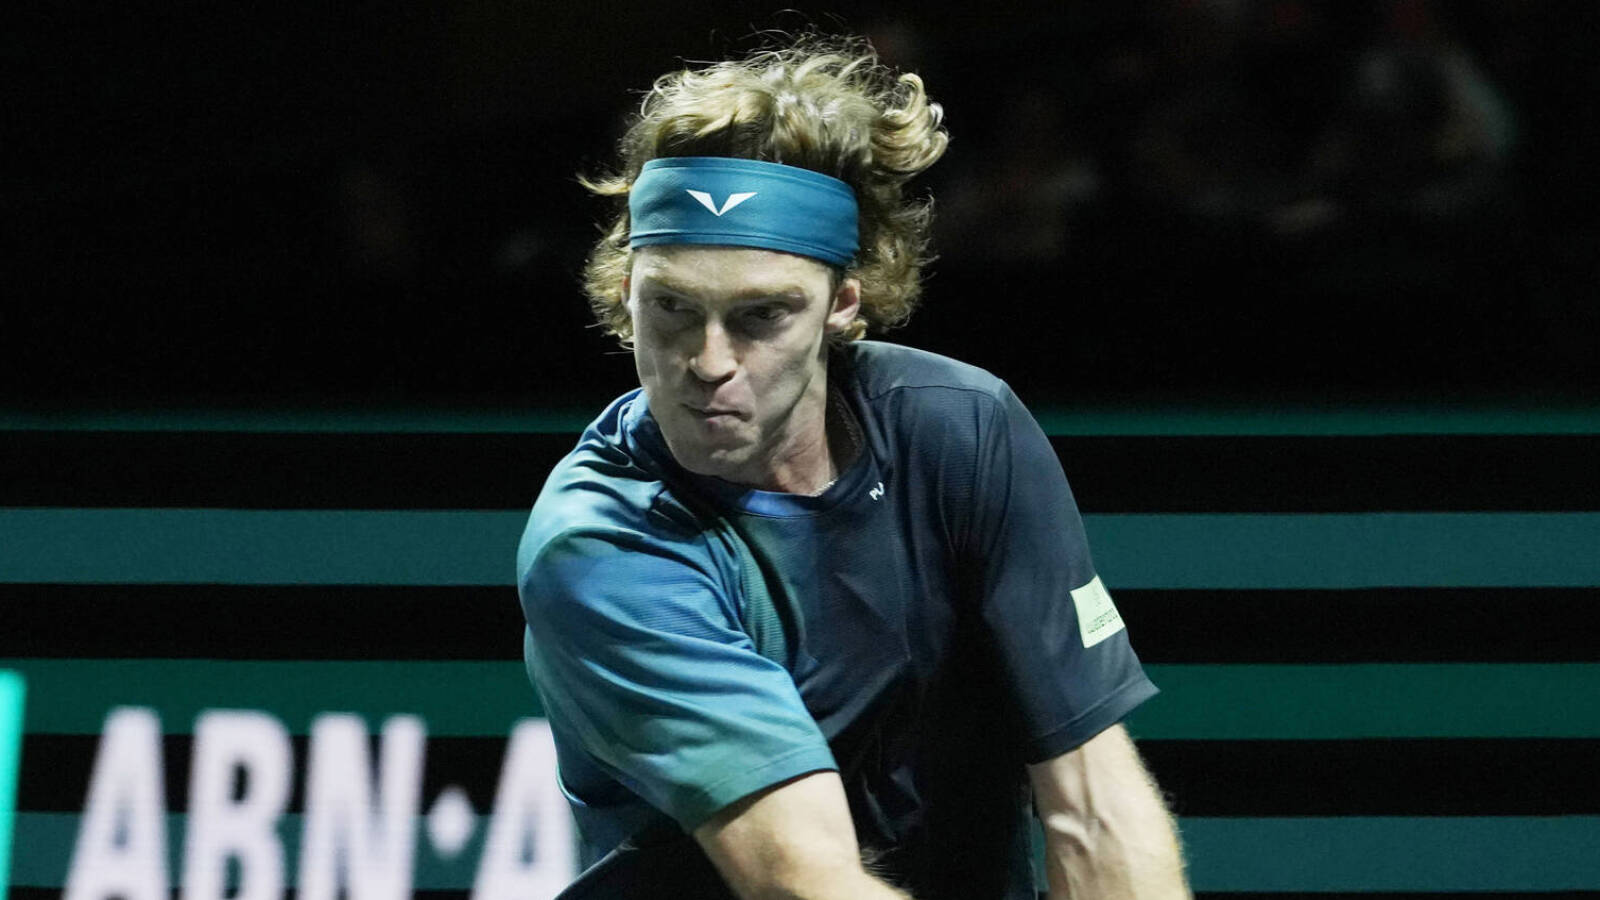 'Andrey said something crazy,' Alexander Bublik reveals what really went down with Andrey Rublev and the line judge amidst controversies